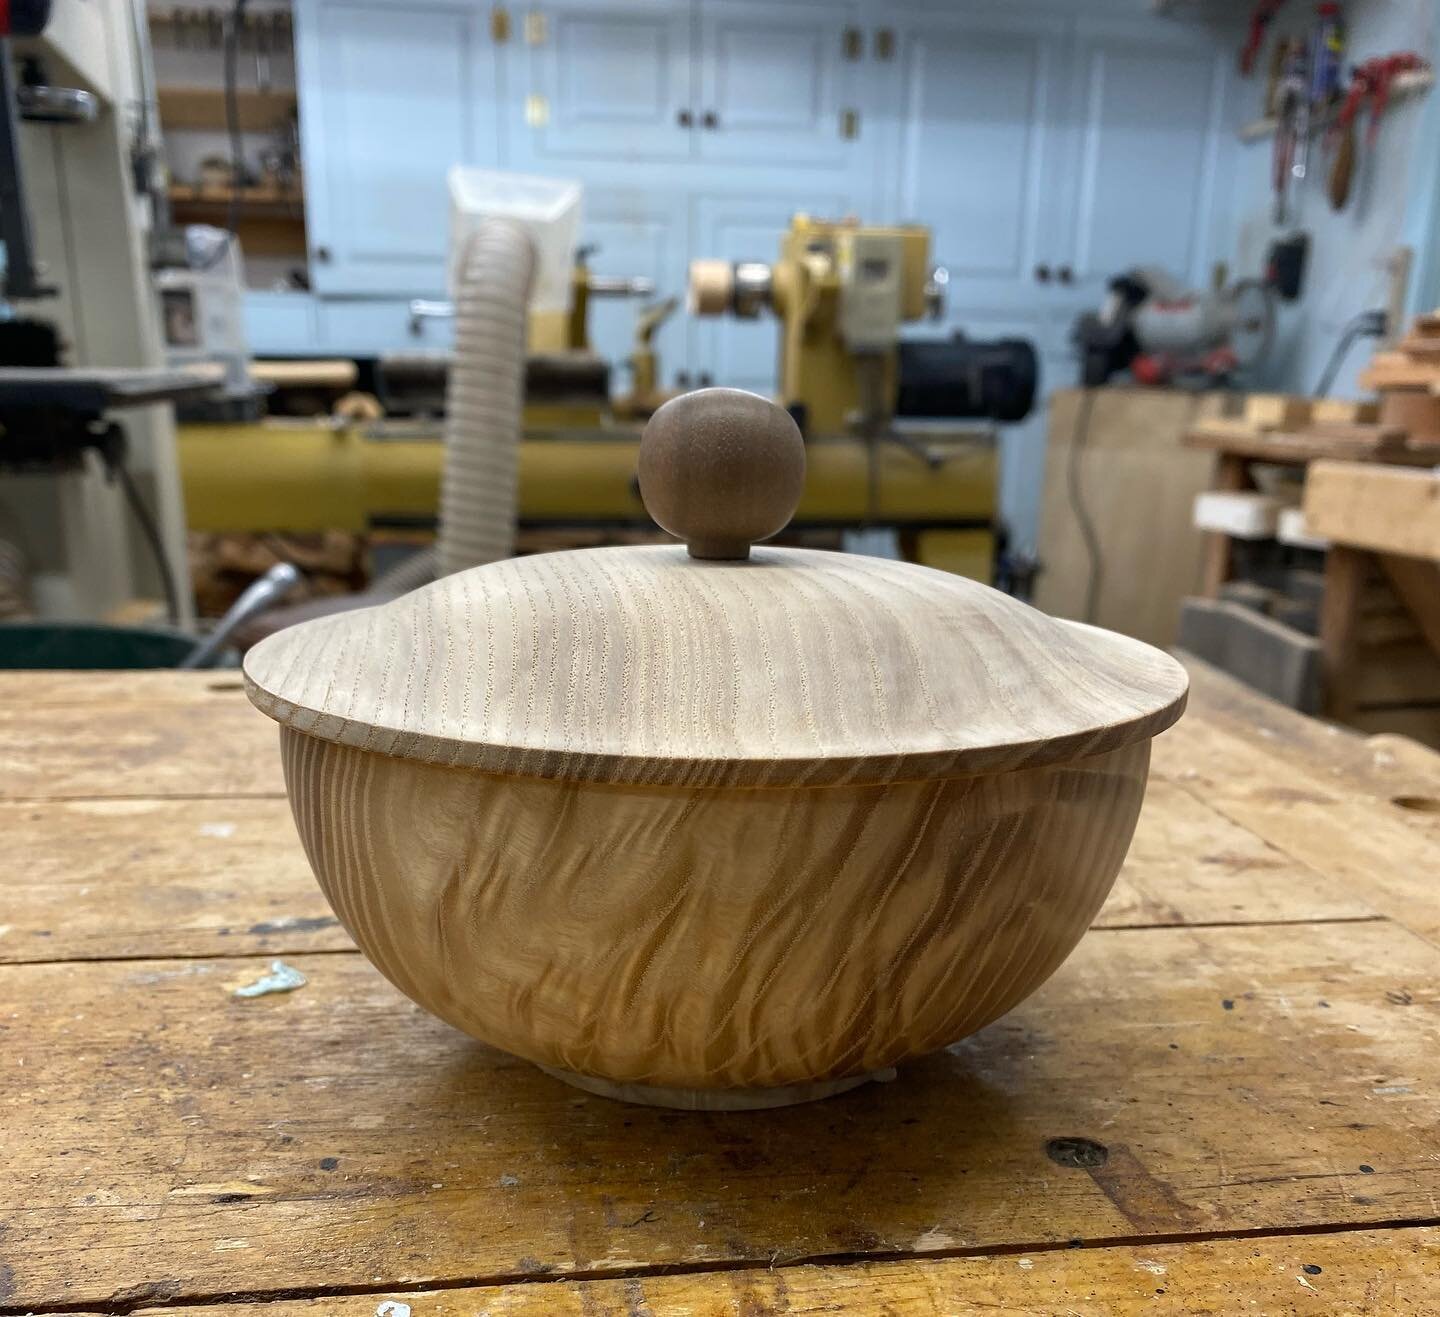 Today&rsquo;s project ready for finish. Highly figured ash bowl with cover from the same section of wood. #ash #ashbowl #coveredbowl #handturned #woodbowls #shoplocal #smallbusiness